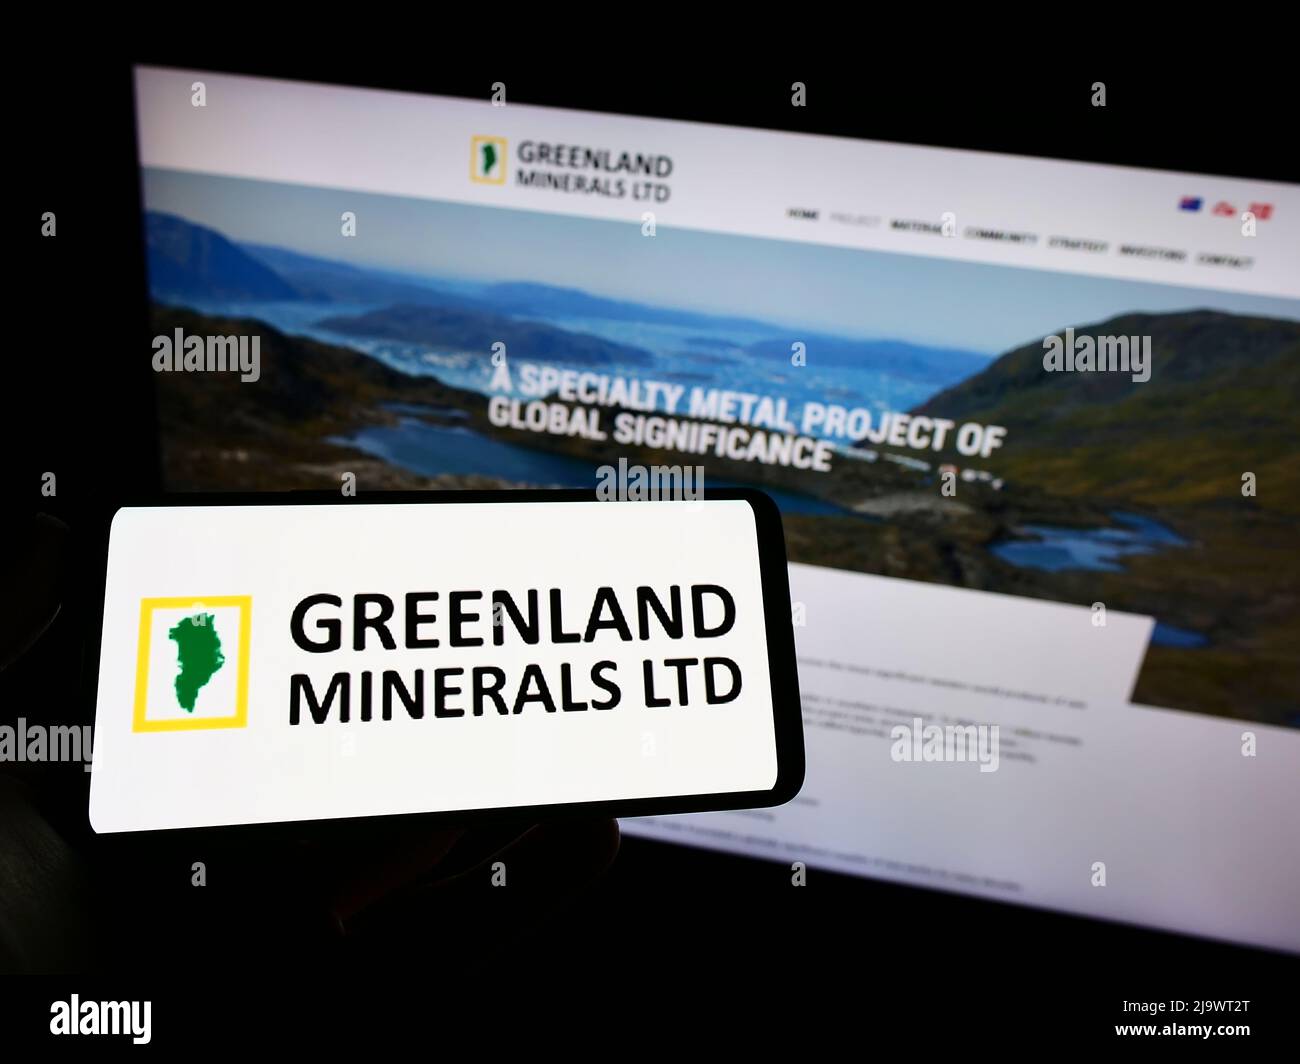 Person holding smartphone with logo of mining company Greenland Minerals Limited on screen in front of website. Focus on phone display. Stock Photo